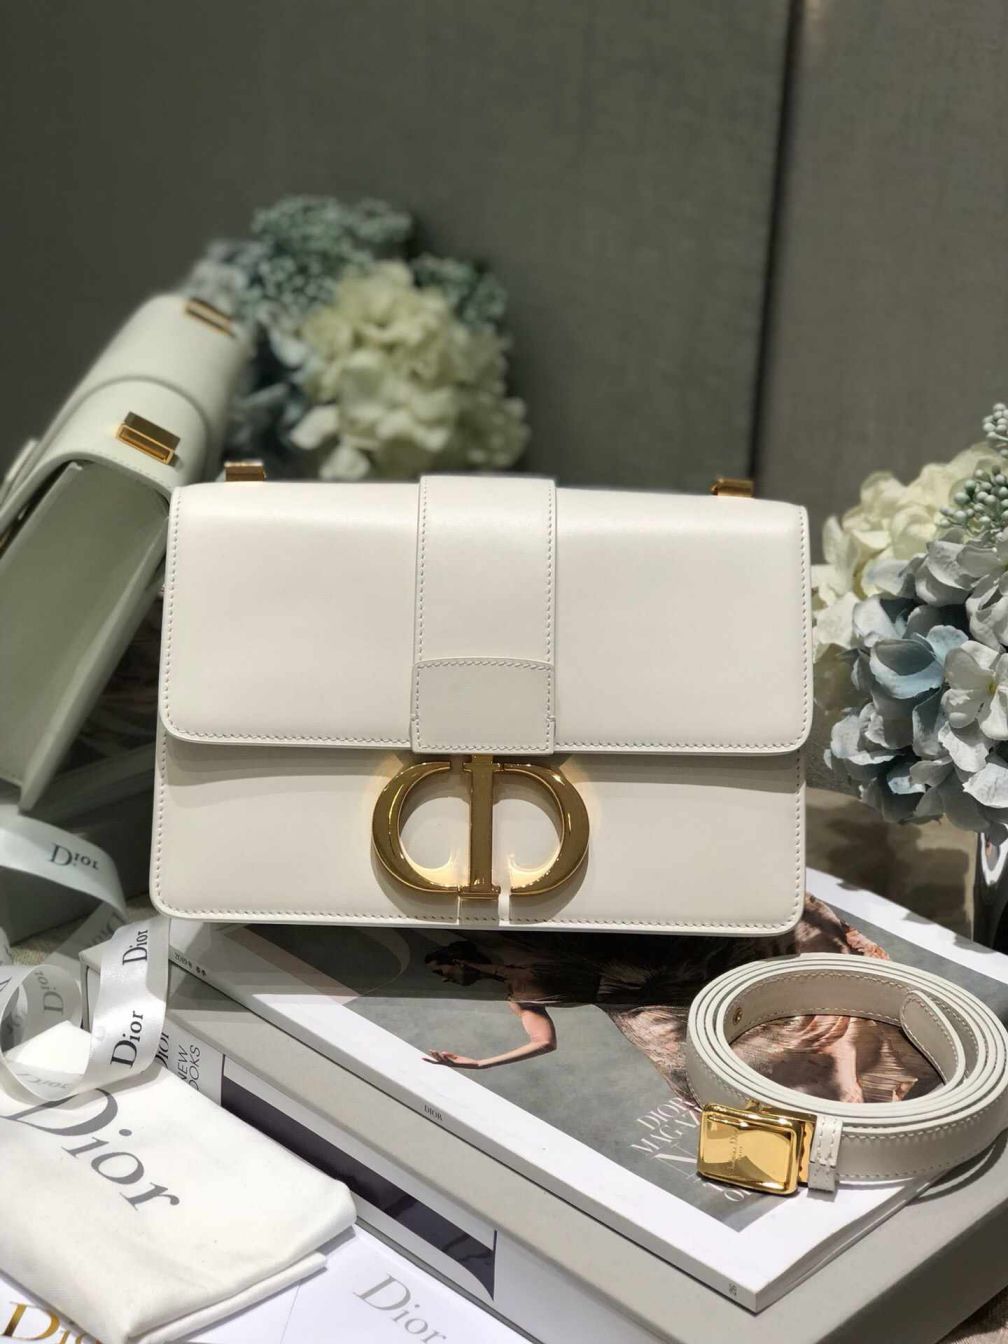 CD 2019 ALL LEATHER 30 MONTAIGNE BAGS WHITE